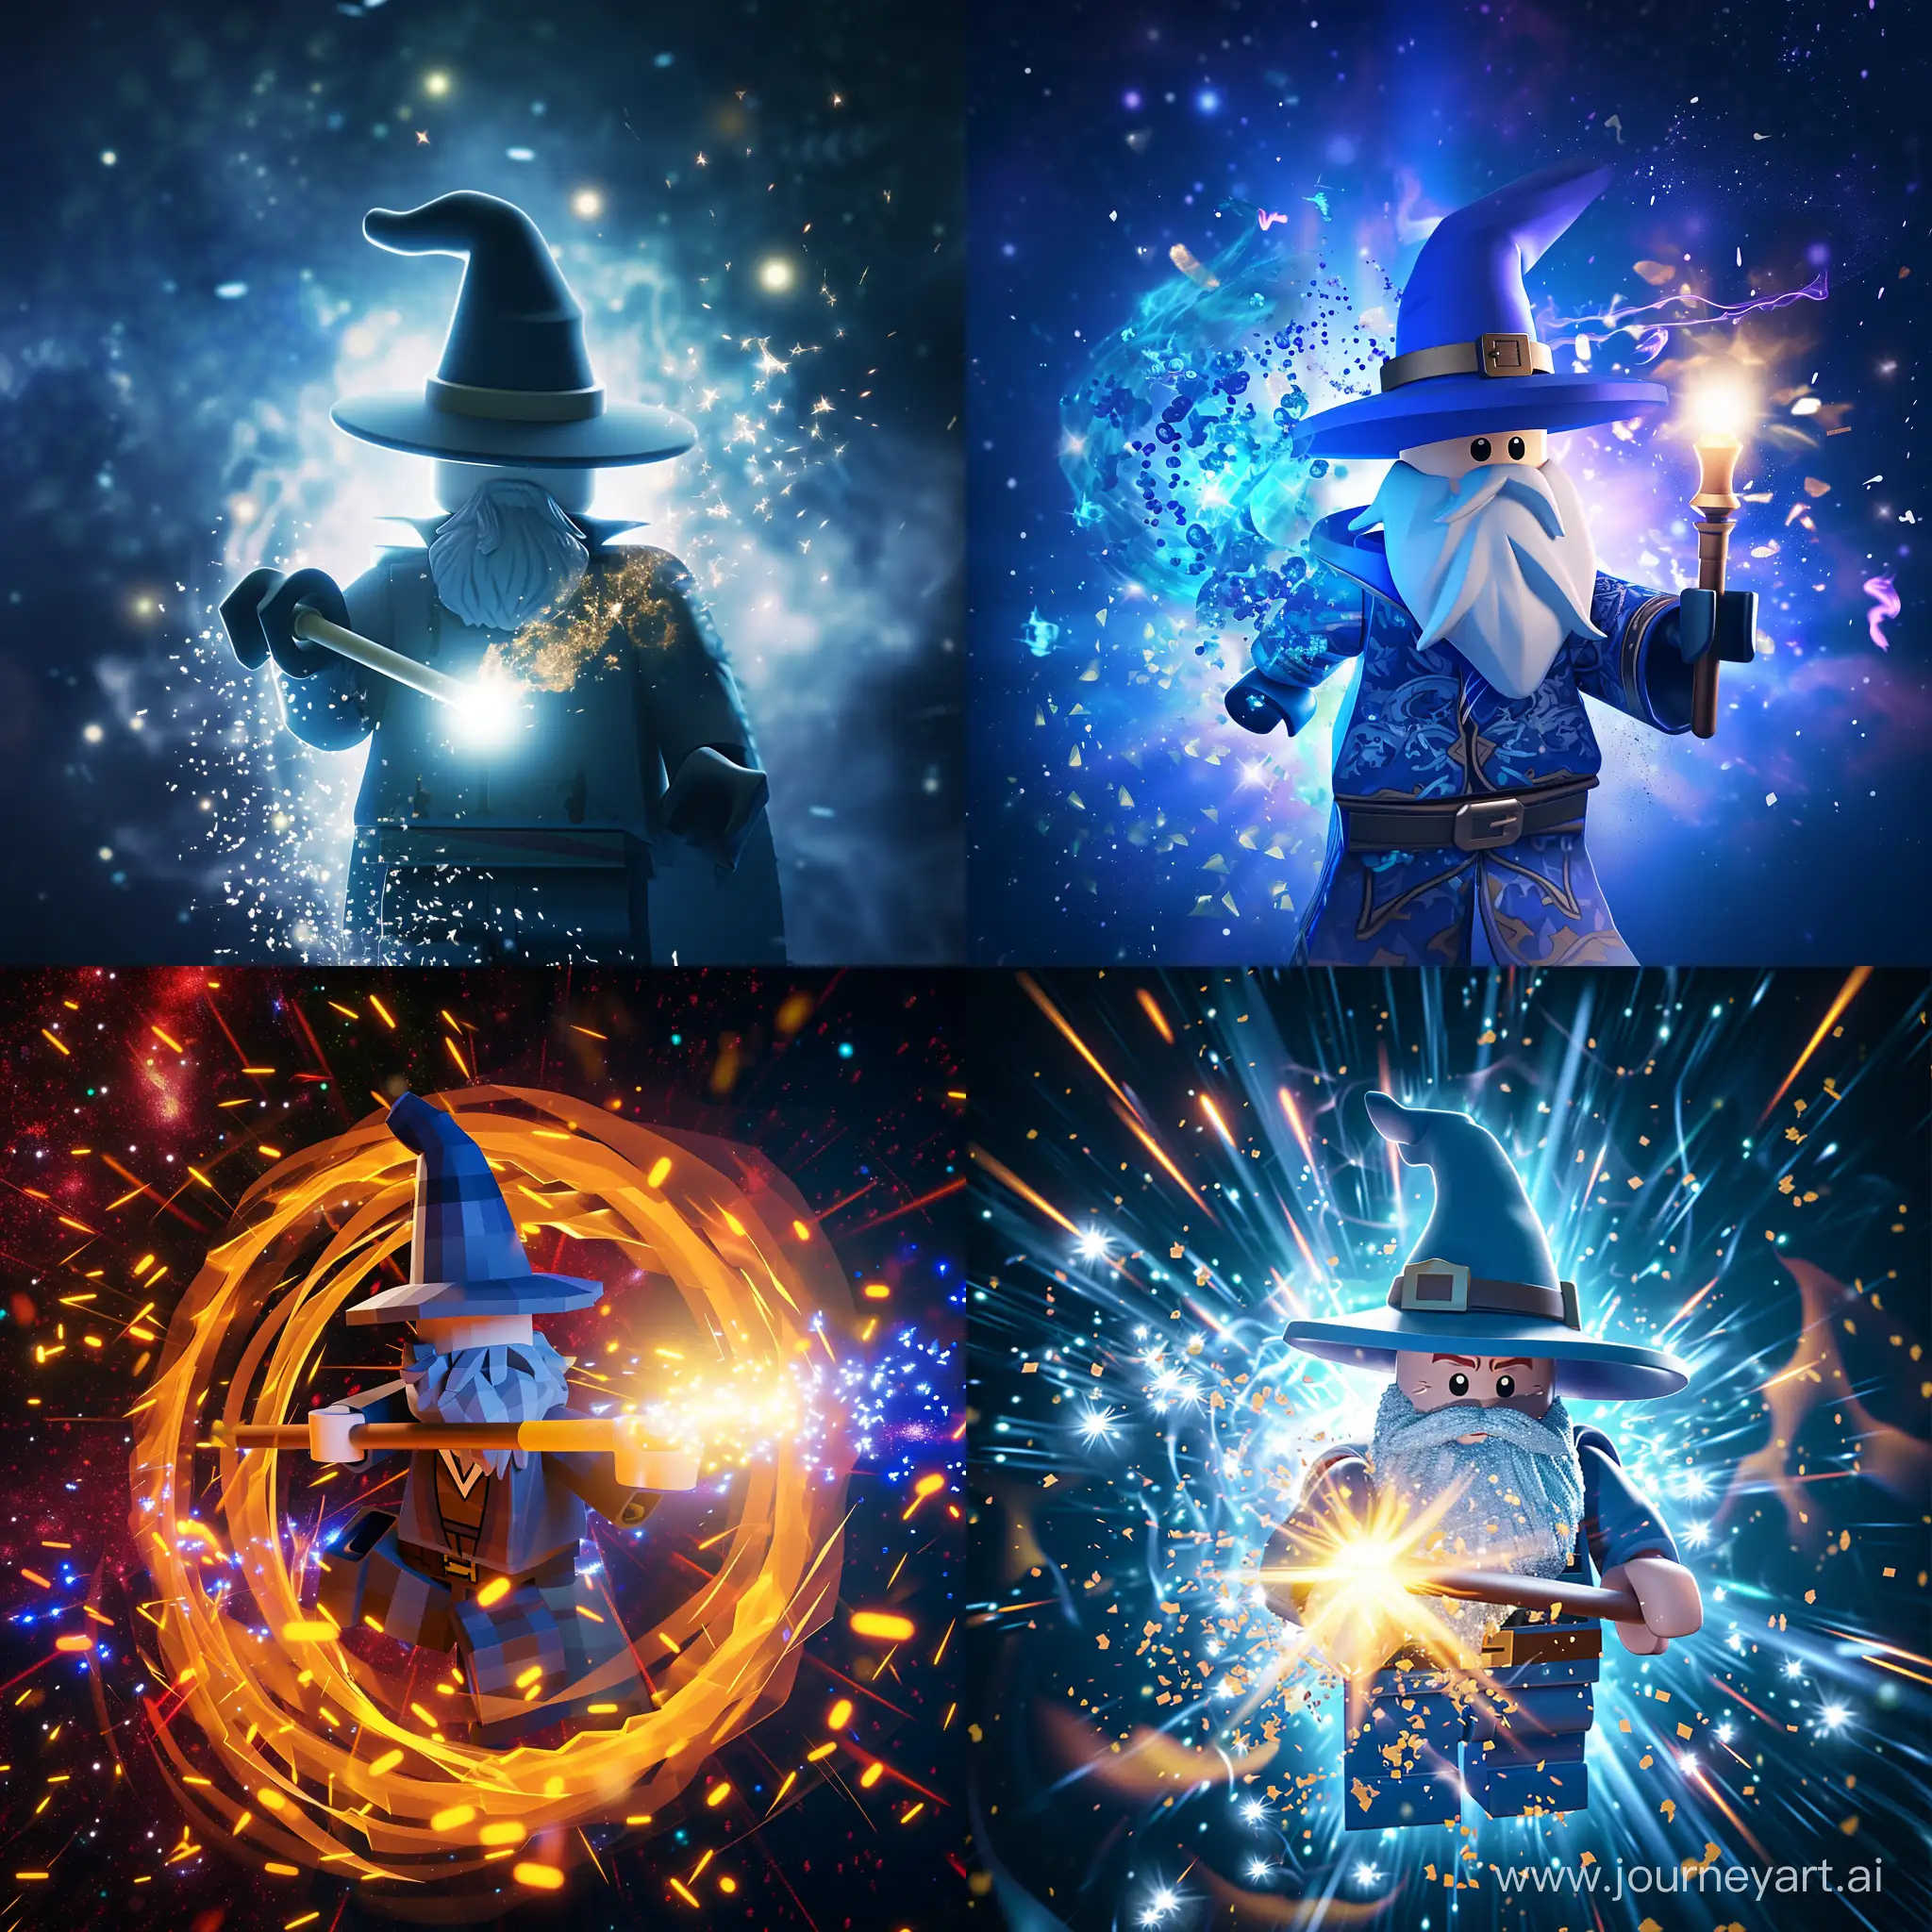 A wizard, whose only visible body is his torso, arms and head, holds a magic wand with spell particles around it in the center of the Roblox-style picture.